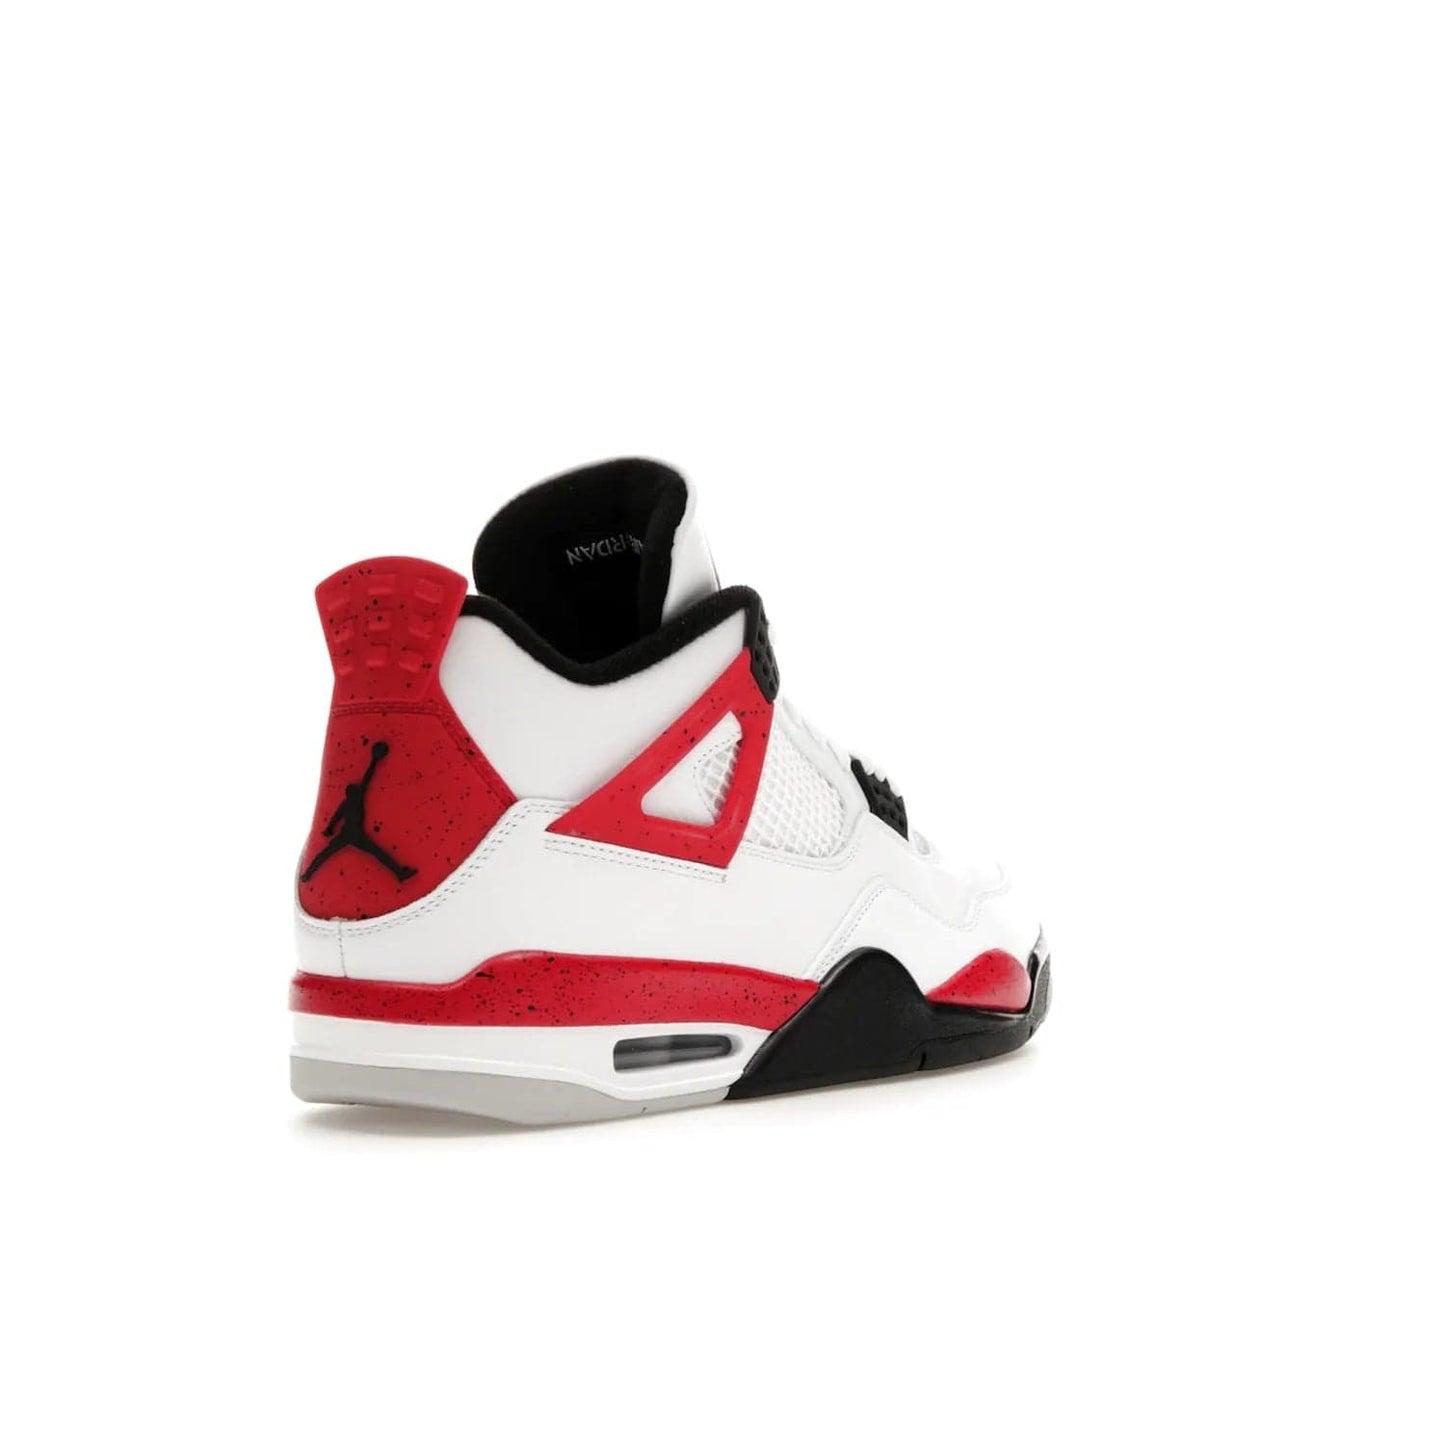 Jordan 4 Retro Red Cement - Image 32 - Only at www.BallersClubKickz.com - Iconic Jordan silhouette with a unique twist. White premium leather uppers with fire red and black detailing. Black, white, and fire red midsole with mesh detailing and Jumpman logo. Jordan 4 Retro Red Cement released with premium price.